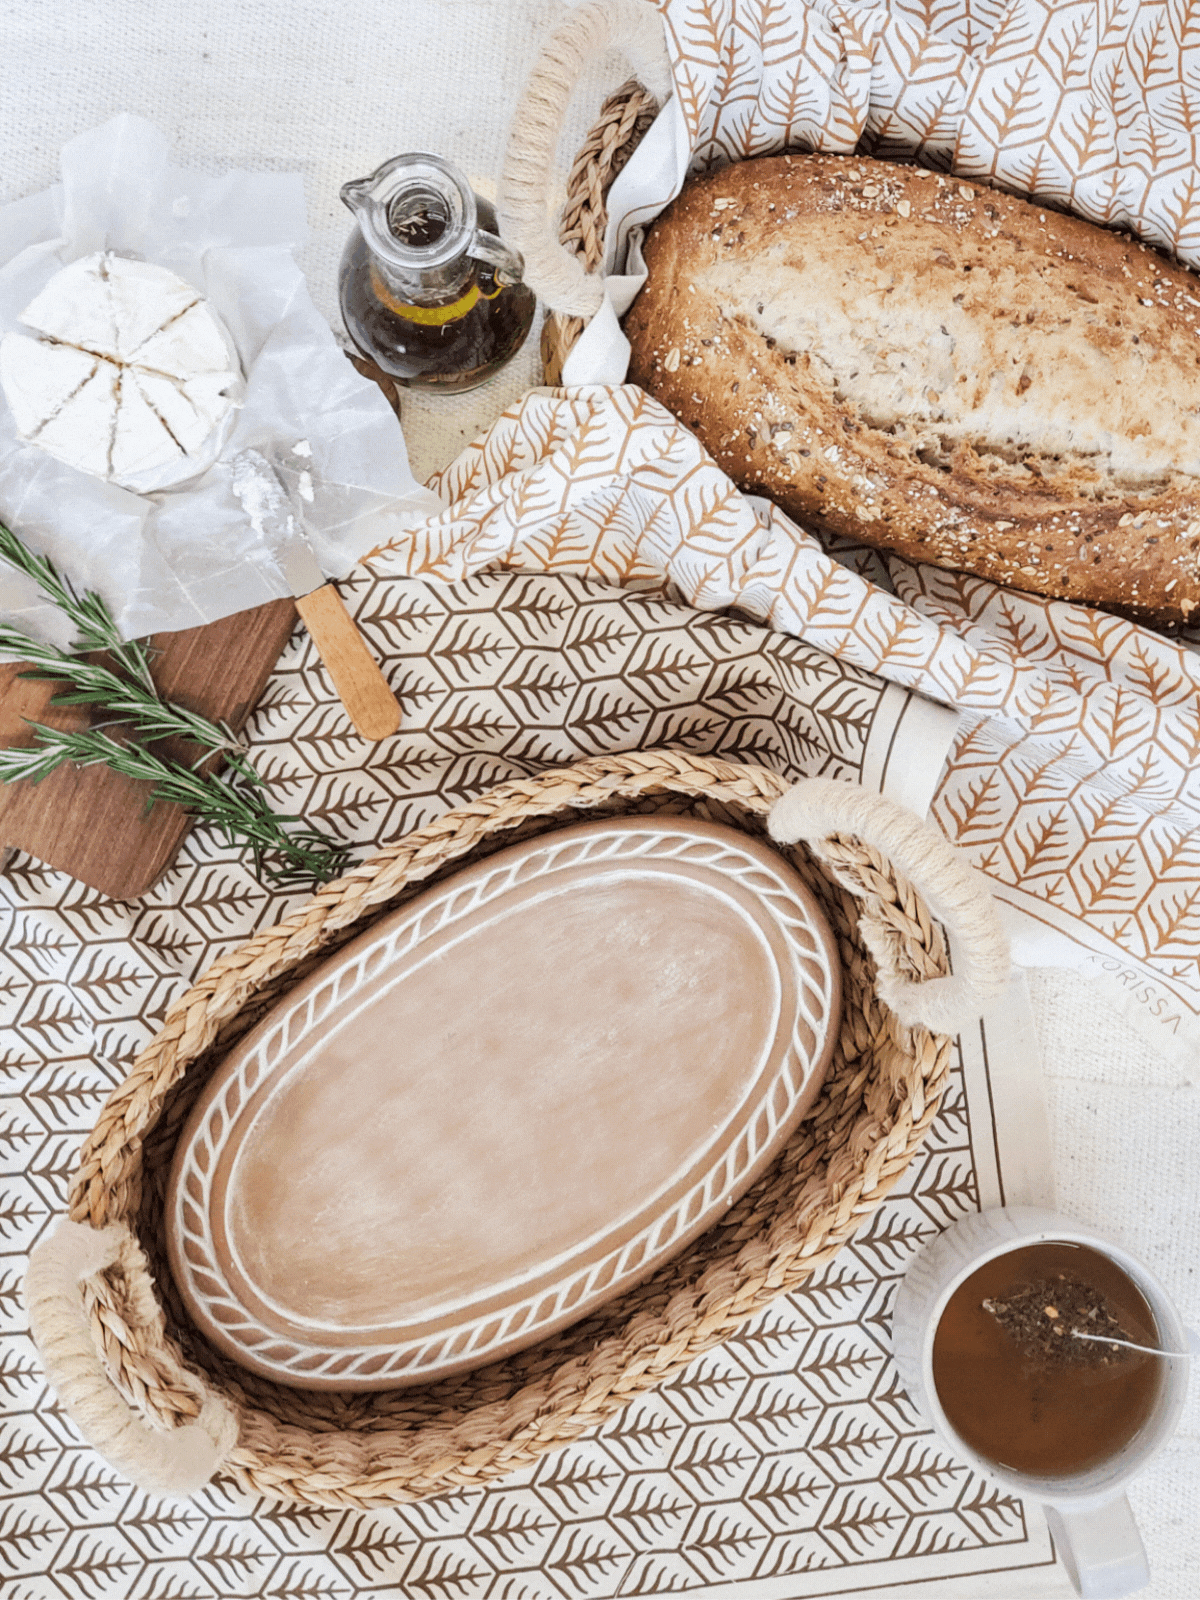 Personalized Bread Warmer & Basket Gift Set with Tea Towel - Recipe Oval